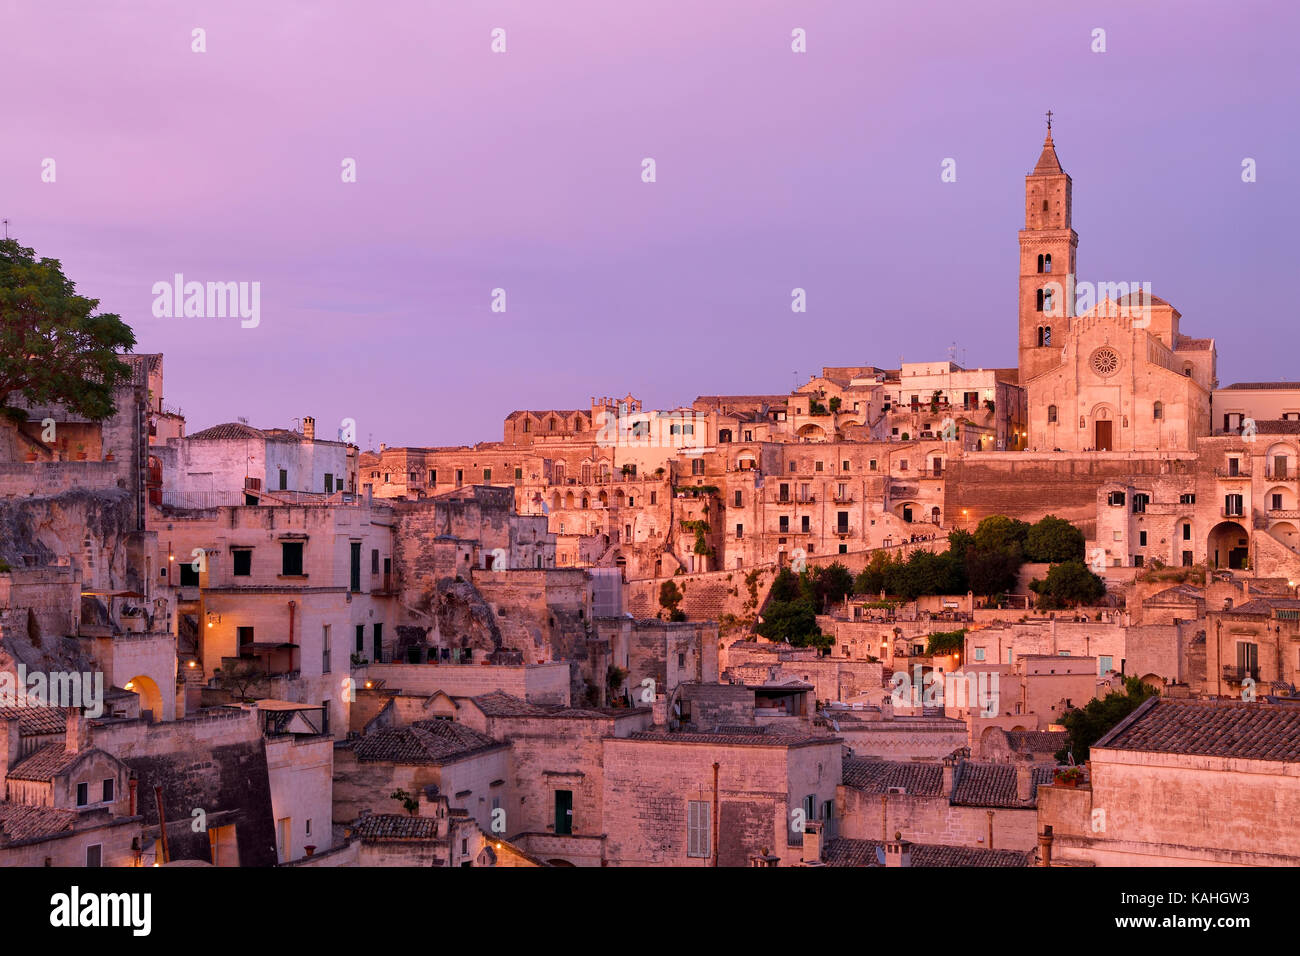 Medieval old town with cathedral, twilight, Sassi di Matera, Capital of Culture 2019, Matera, province of Basilicata, Italy Stock Photo